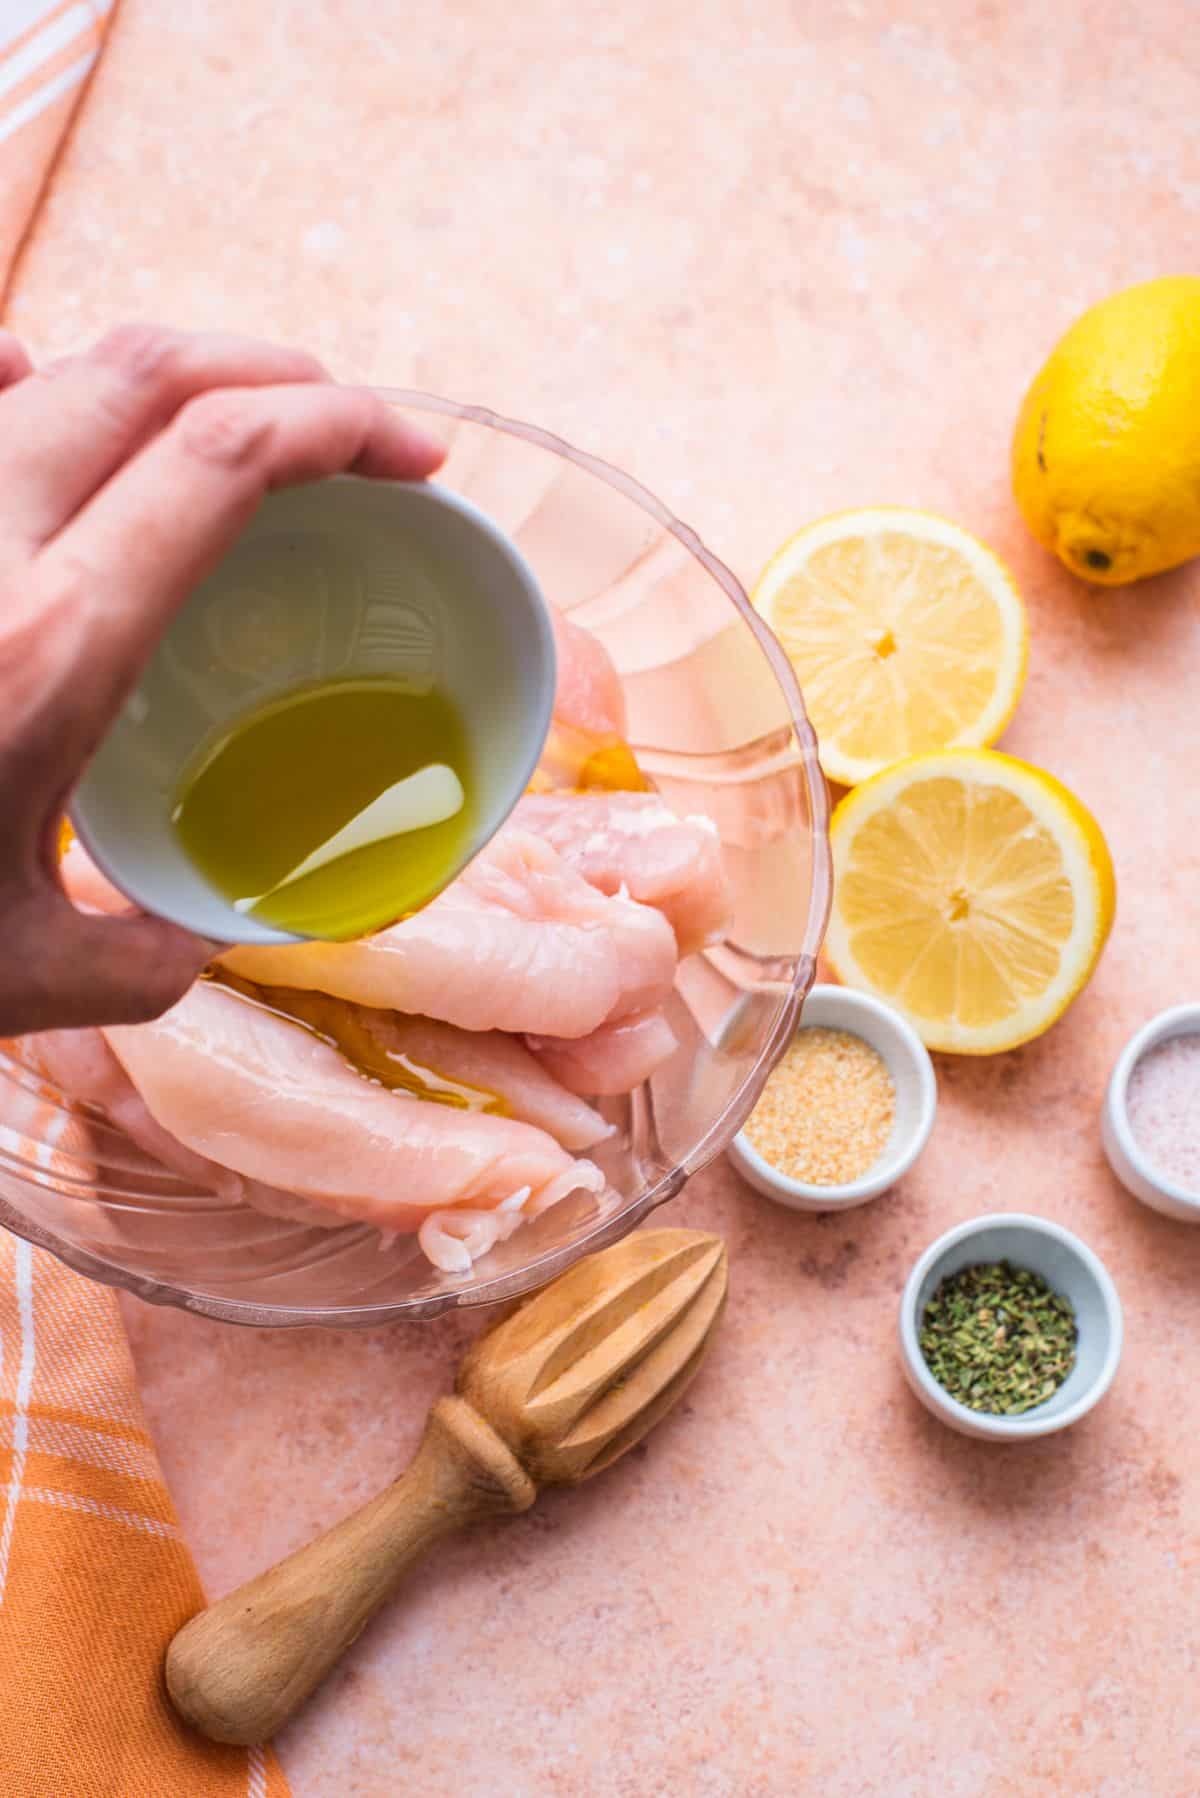 pour olive oil over raw chicken in bowl